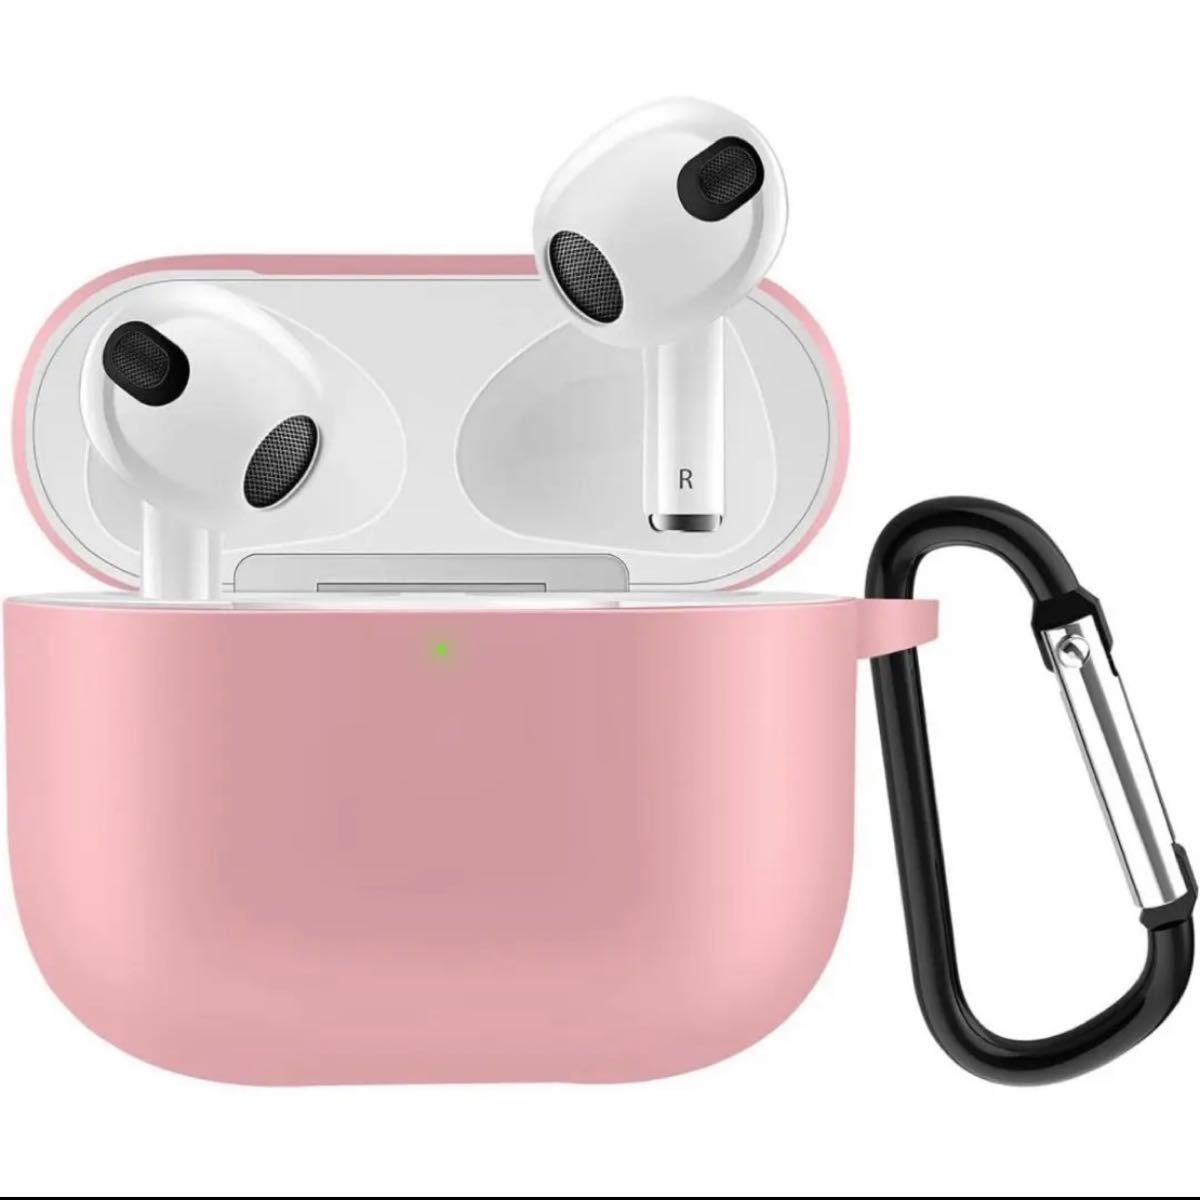 ☆30%off価格☆箱付き・未使用品☆ ピンク AirPods 第三世代 ケース 2021年発売